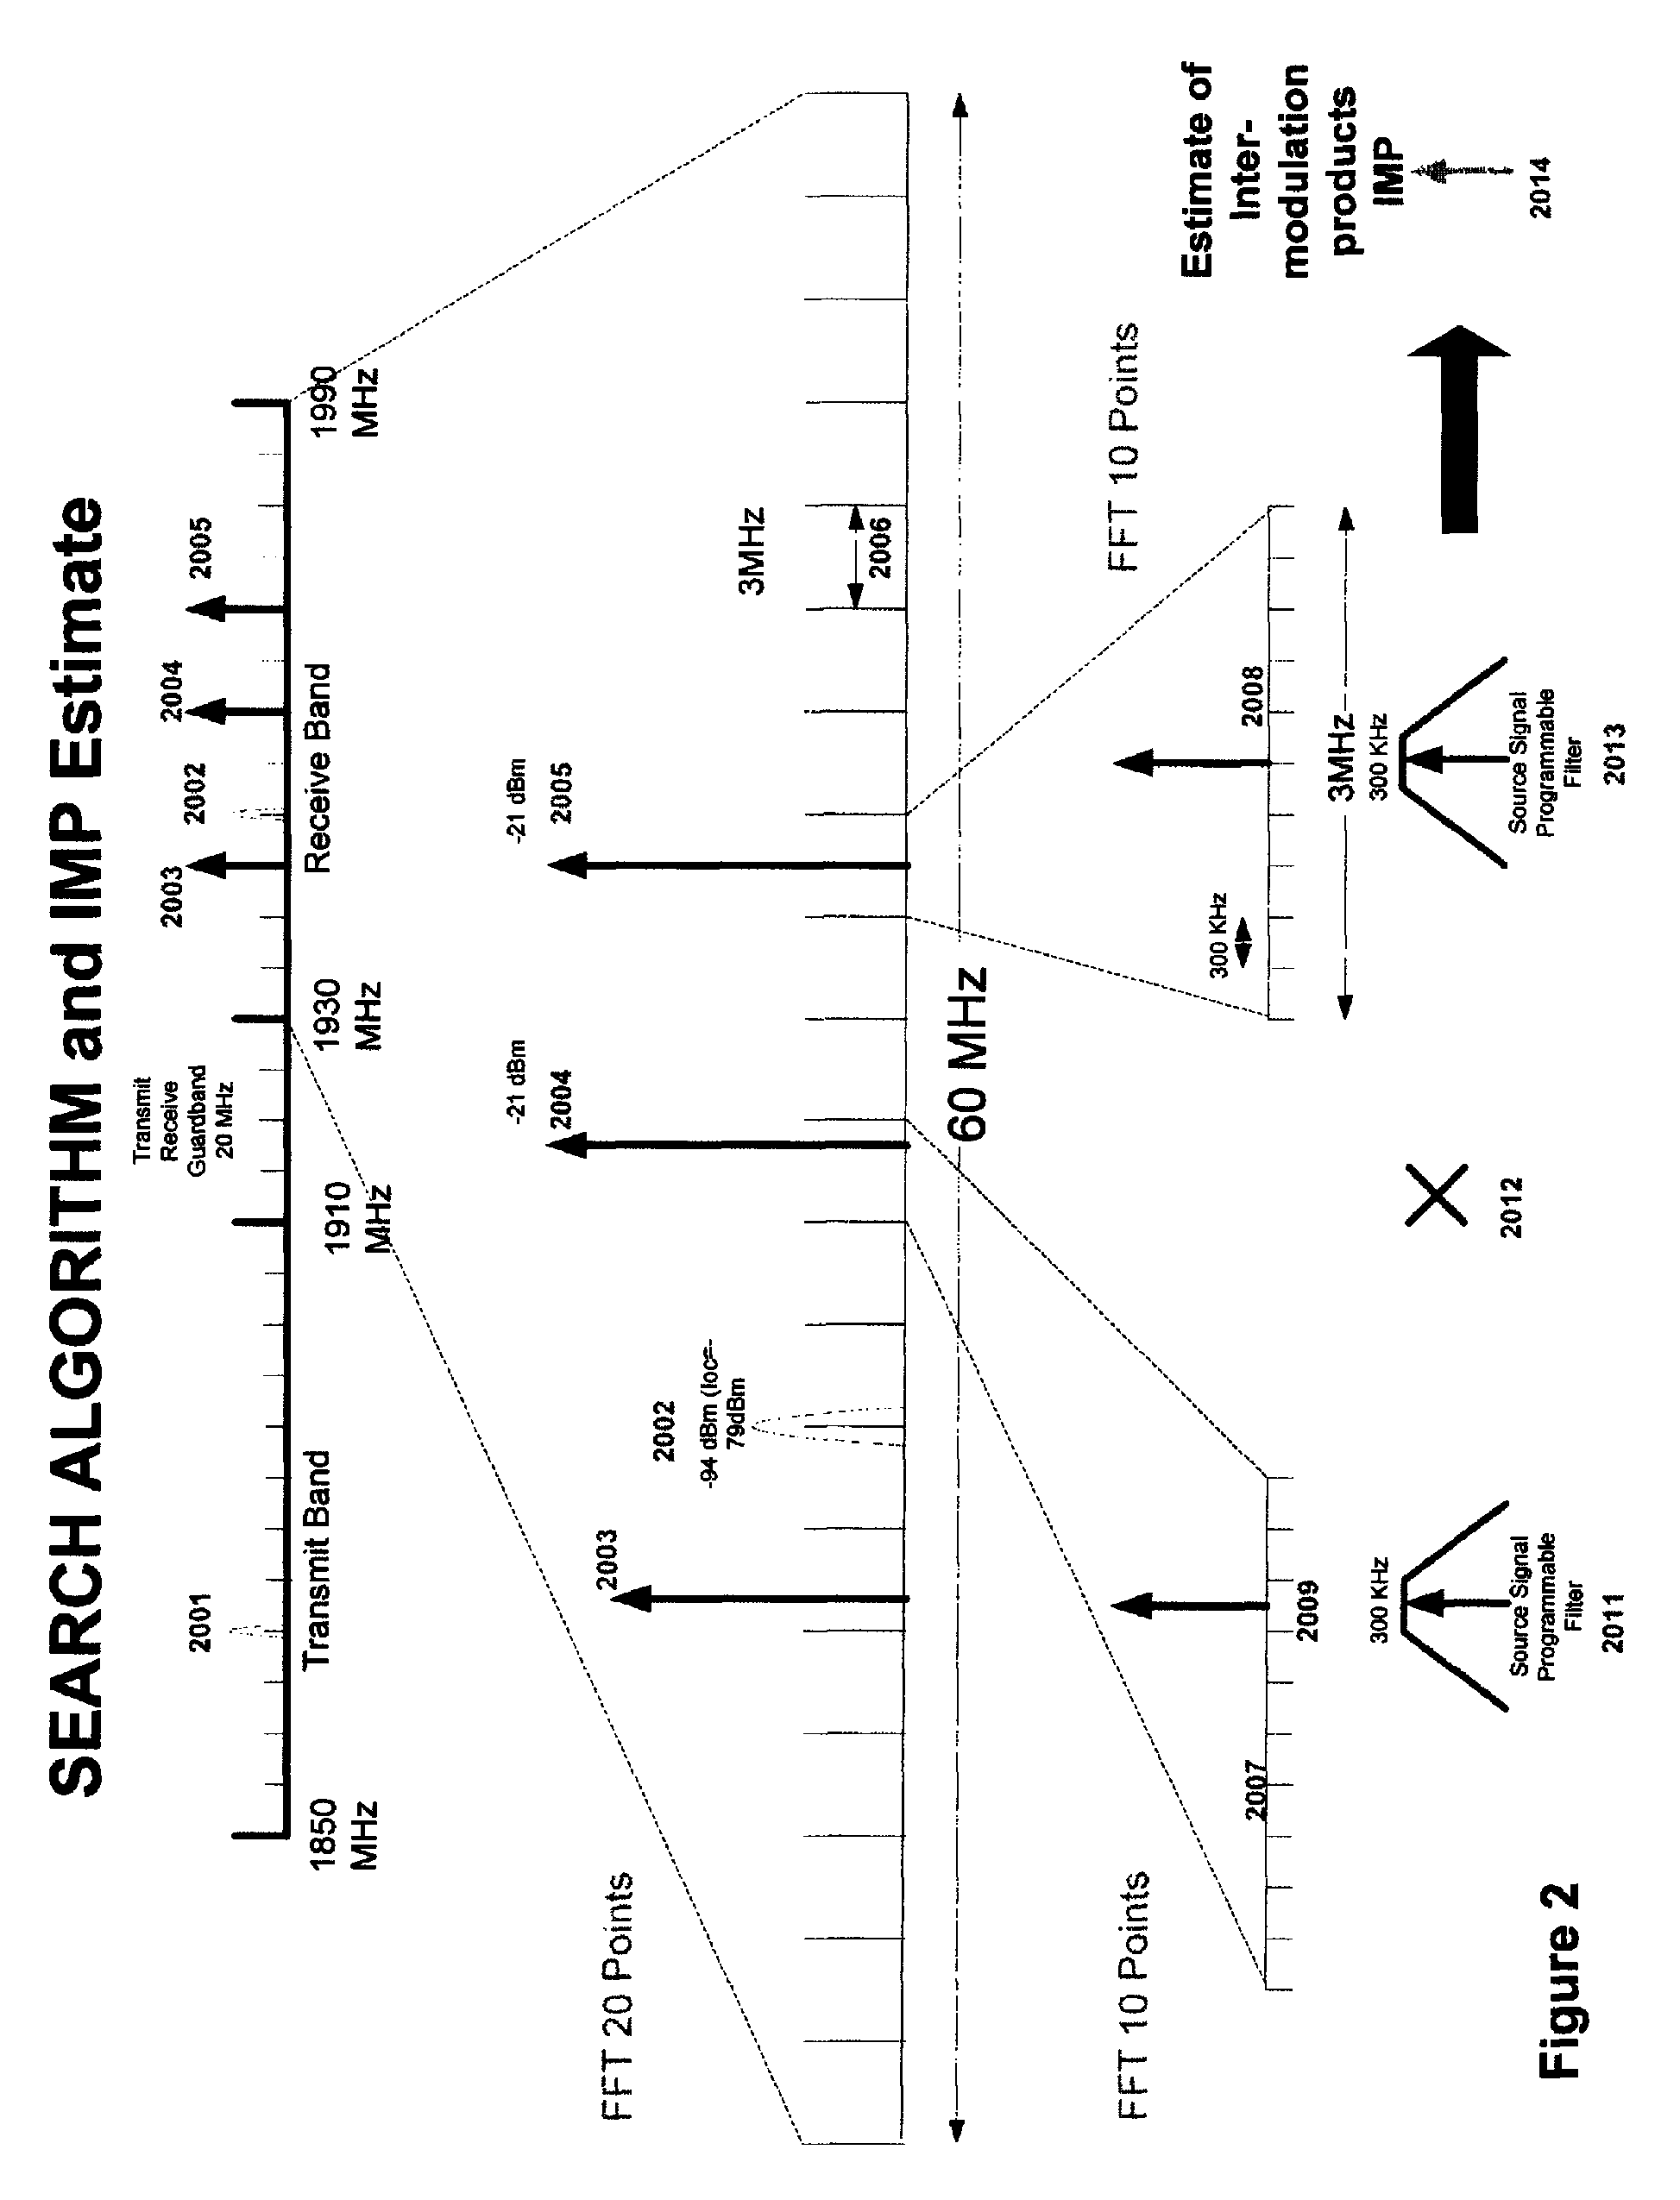 Multi-mode—multi-band direct conversion receiver with complex I and Q channel interference mitigation processing for cancellation of intermodulation products